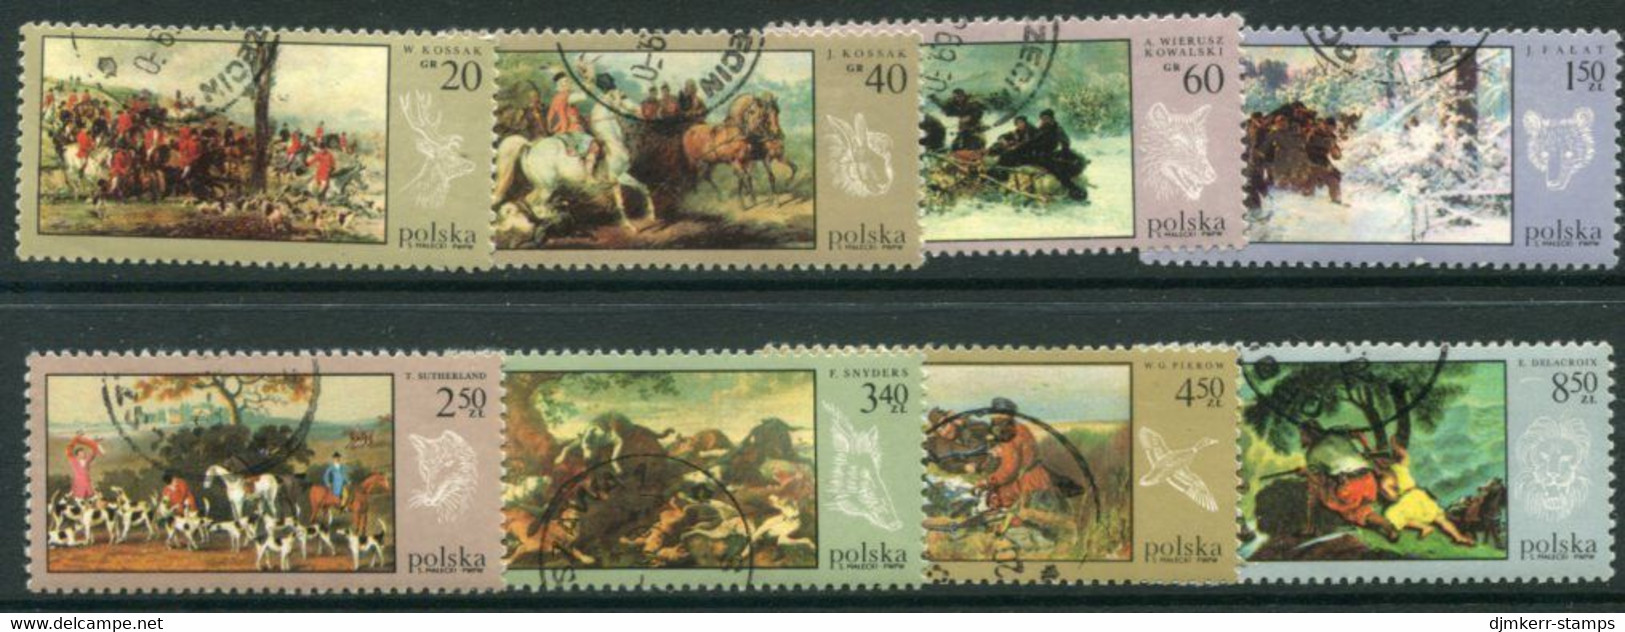 POLAND 1968 Paintings: Hunting Scenes Used.  Michel 1890-97 - Used Stamps